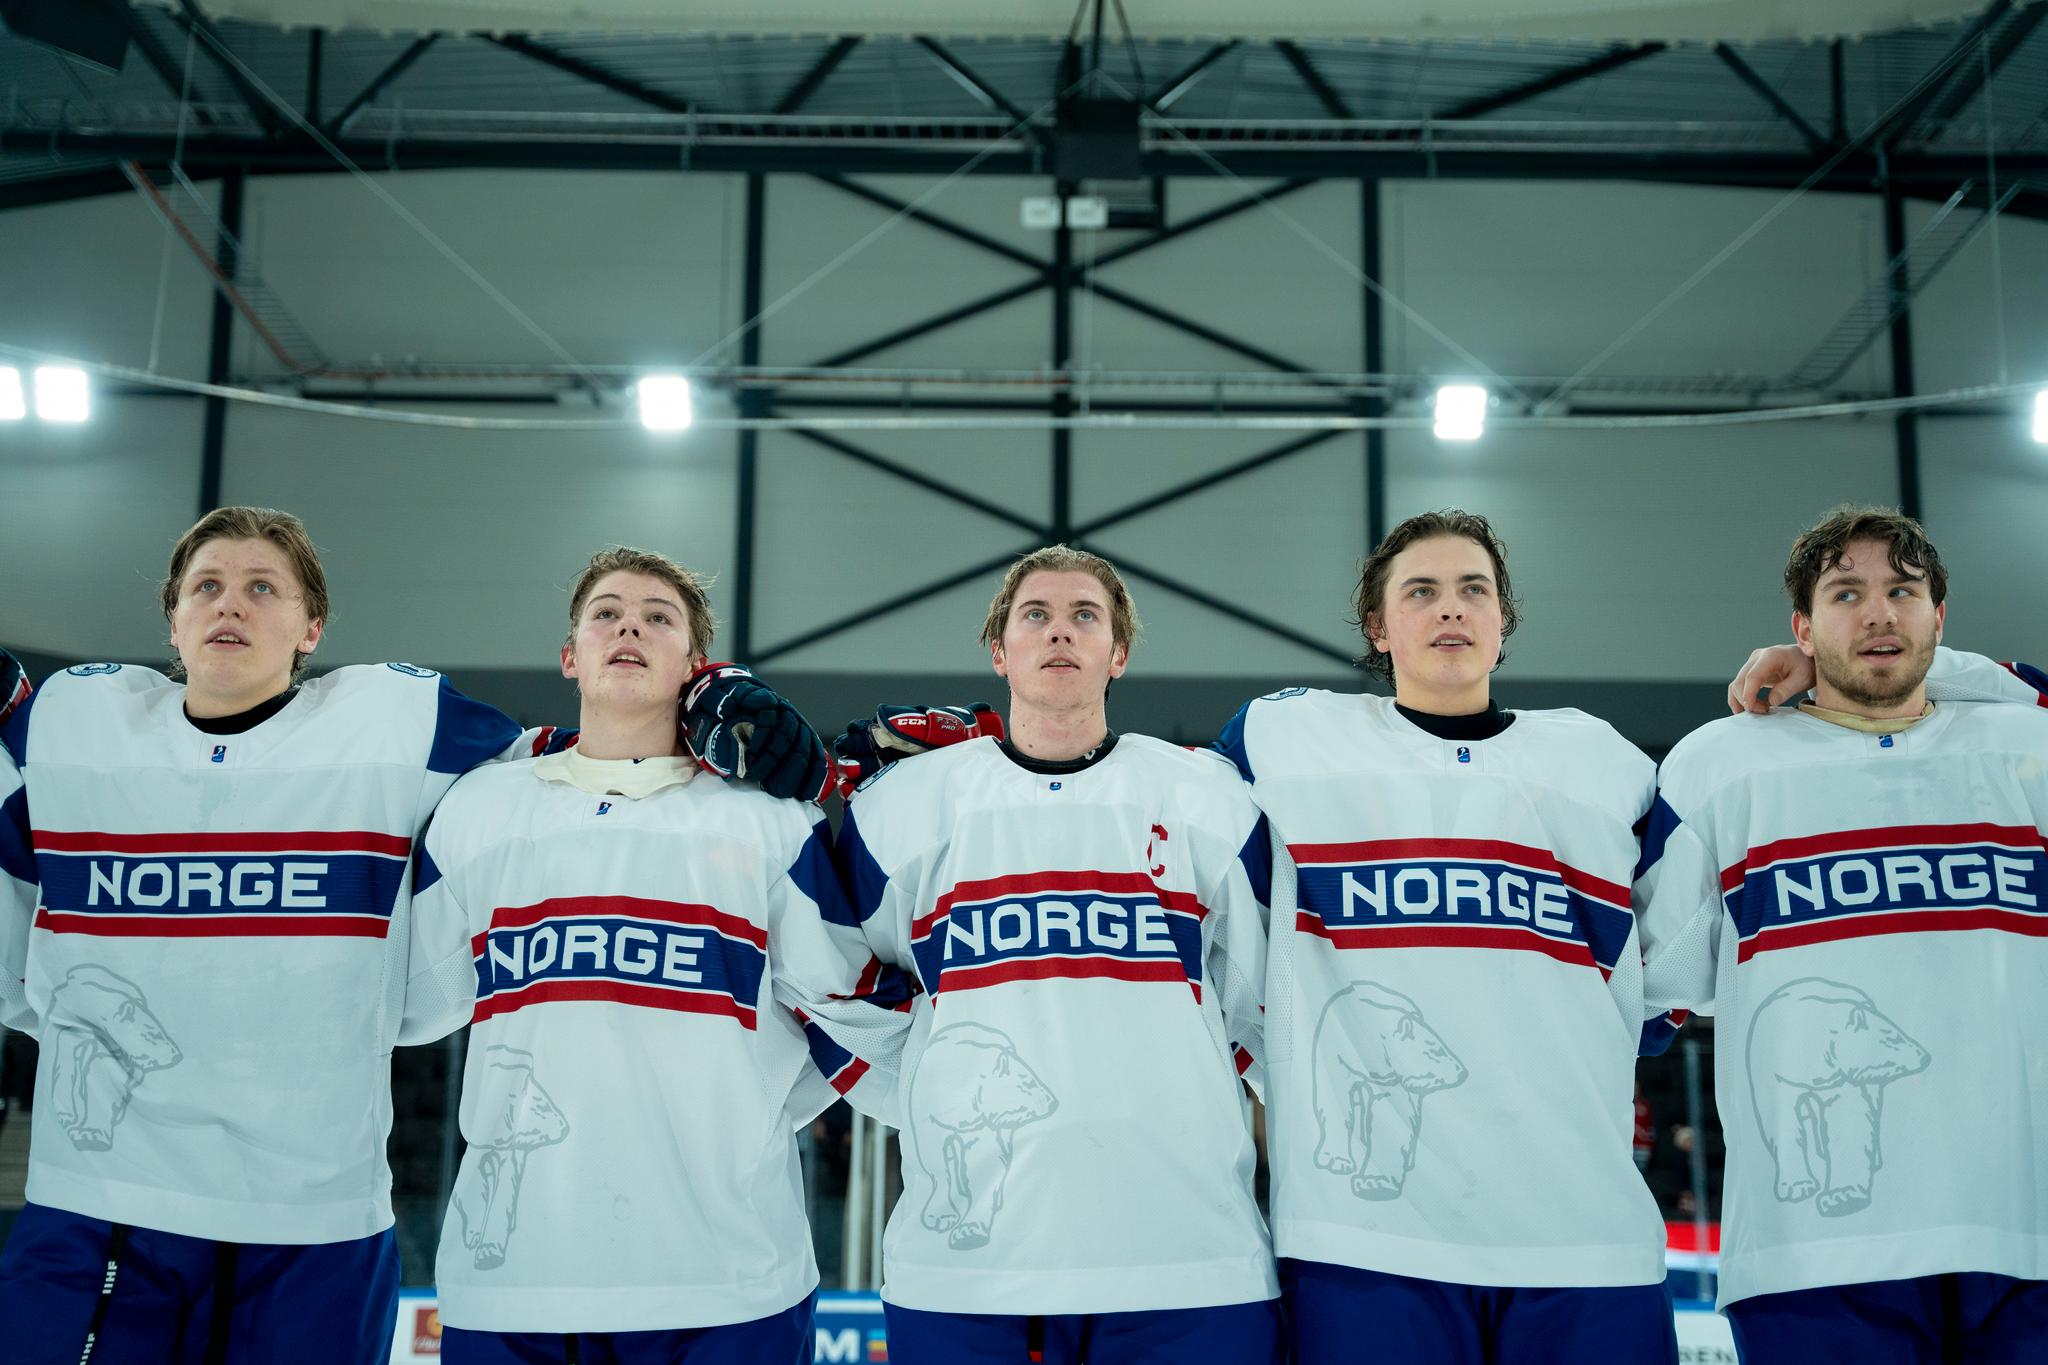 Norway’s U20 ice hockey team won WC at level two – ready for the elite